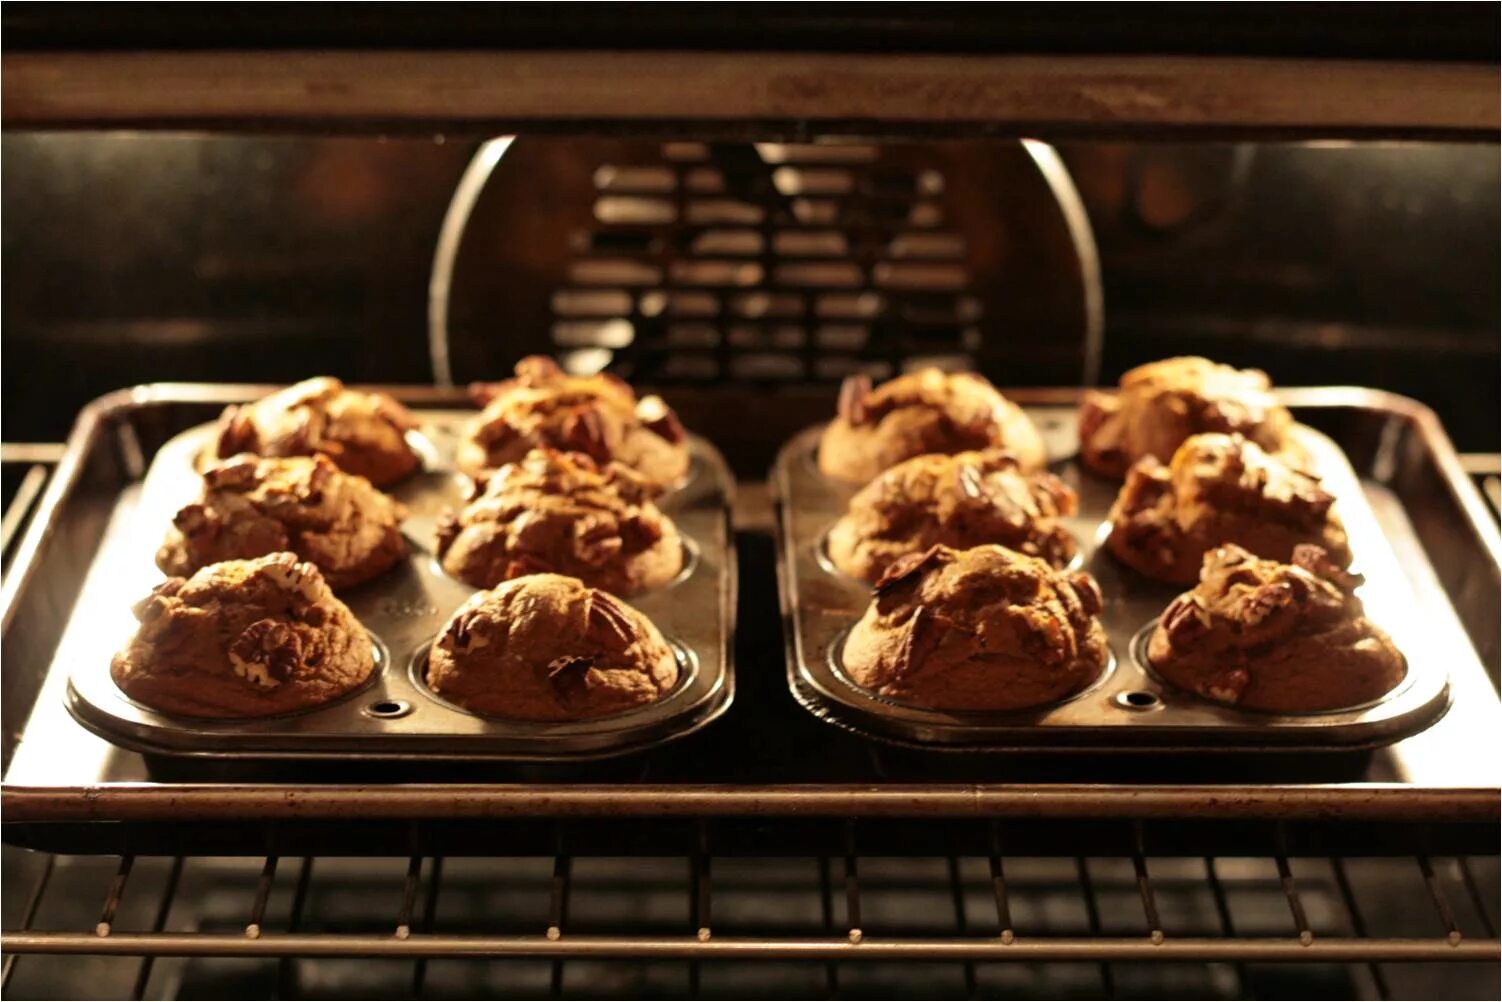 Bake. Bake in the Oven. Baked food. Baking Oven.